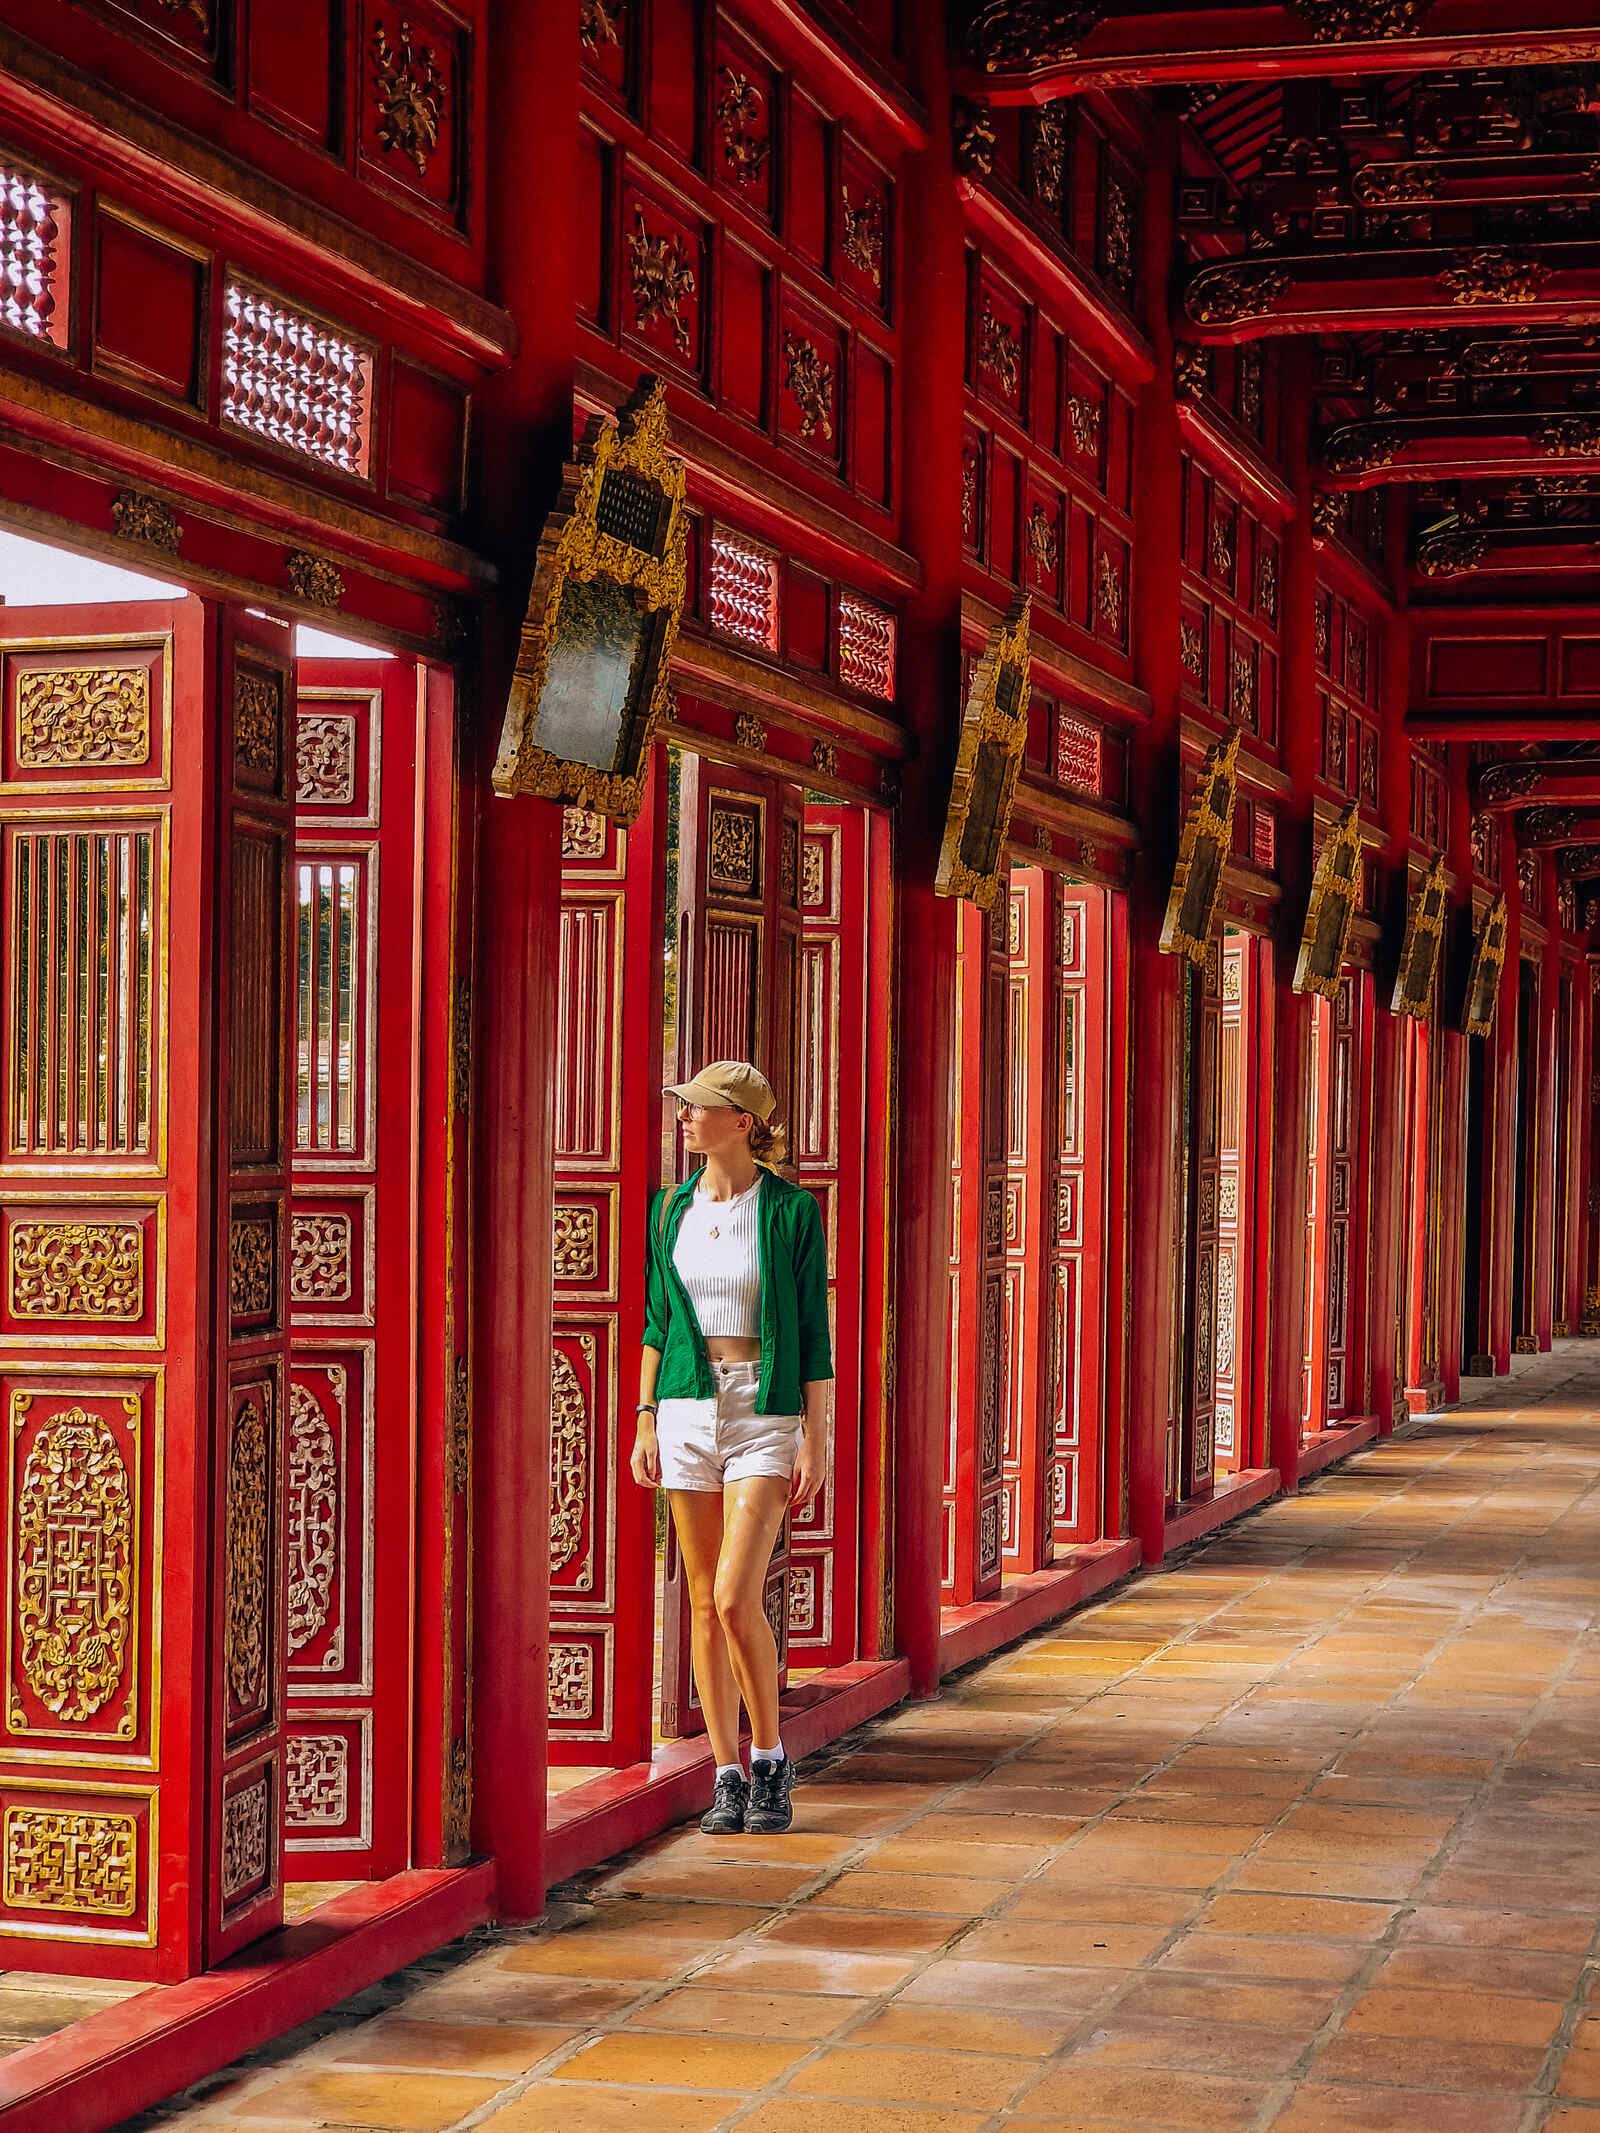 a line of red doorways with ancient carving detail and Helena standing in front